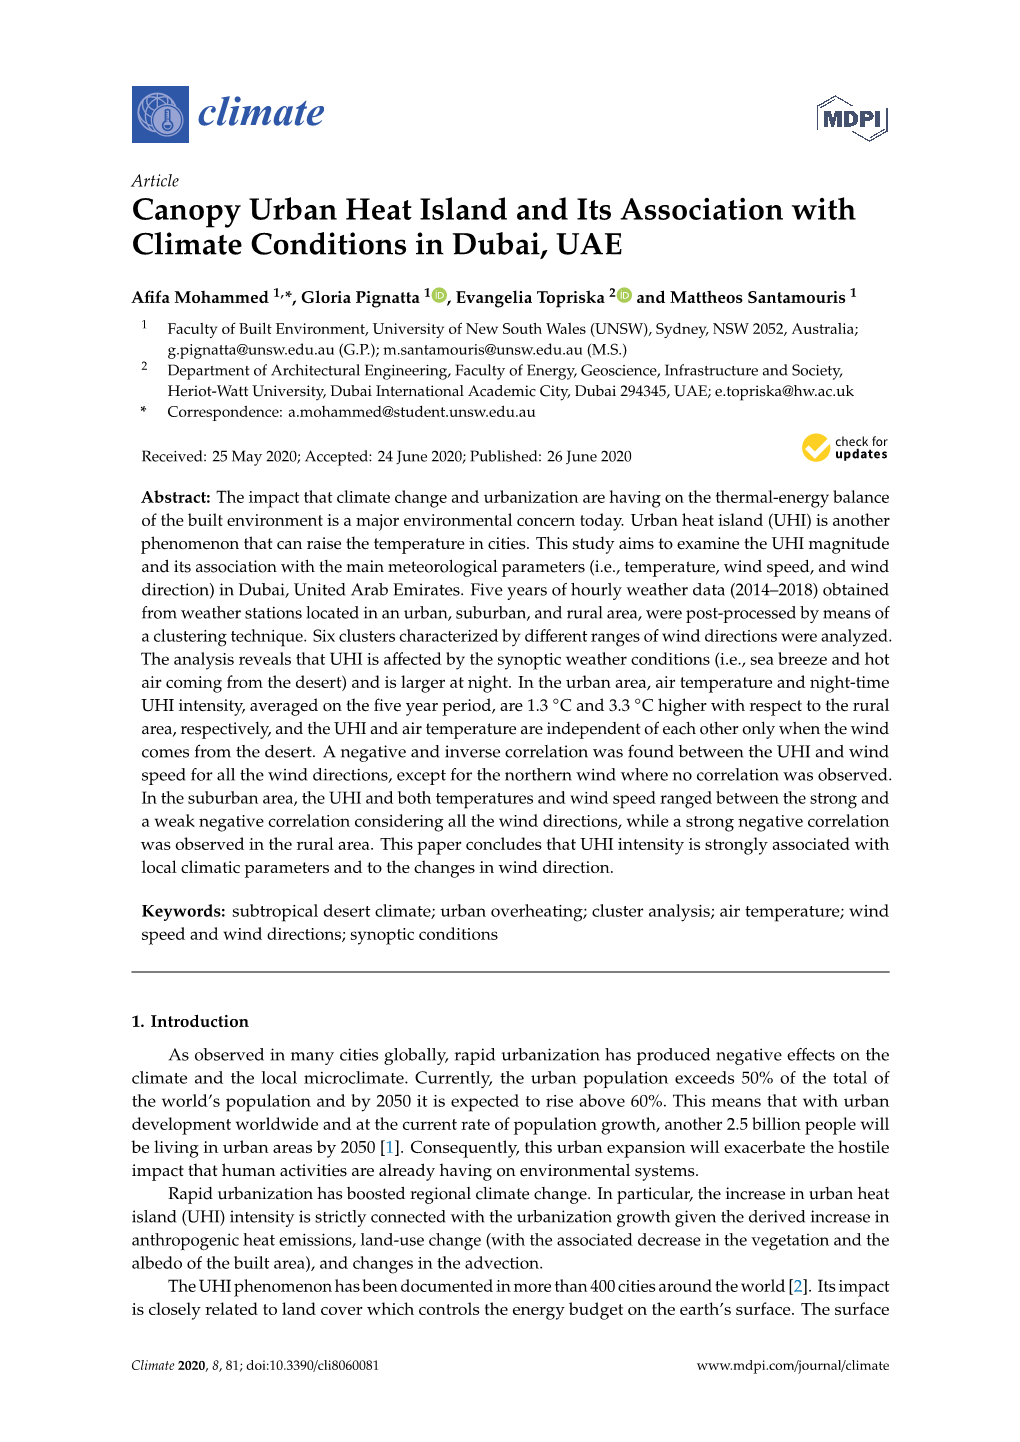 Canopy Urban Heat Island and Its Association with Climate Conditions in Dubai, UAE